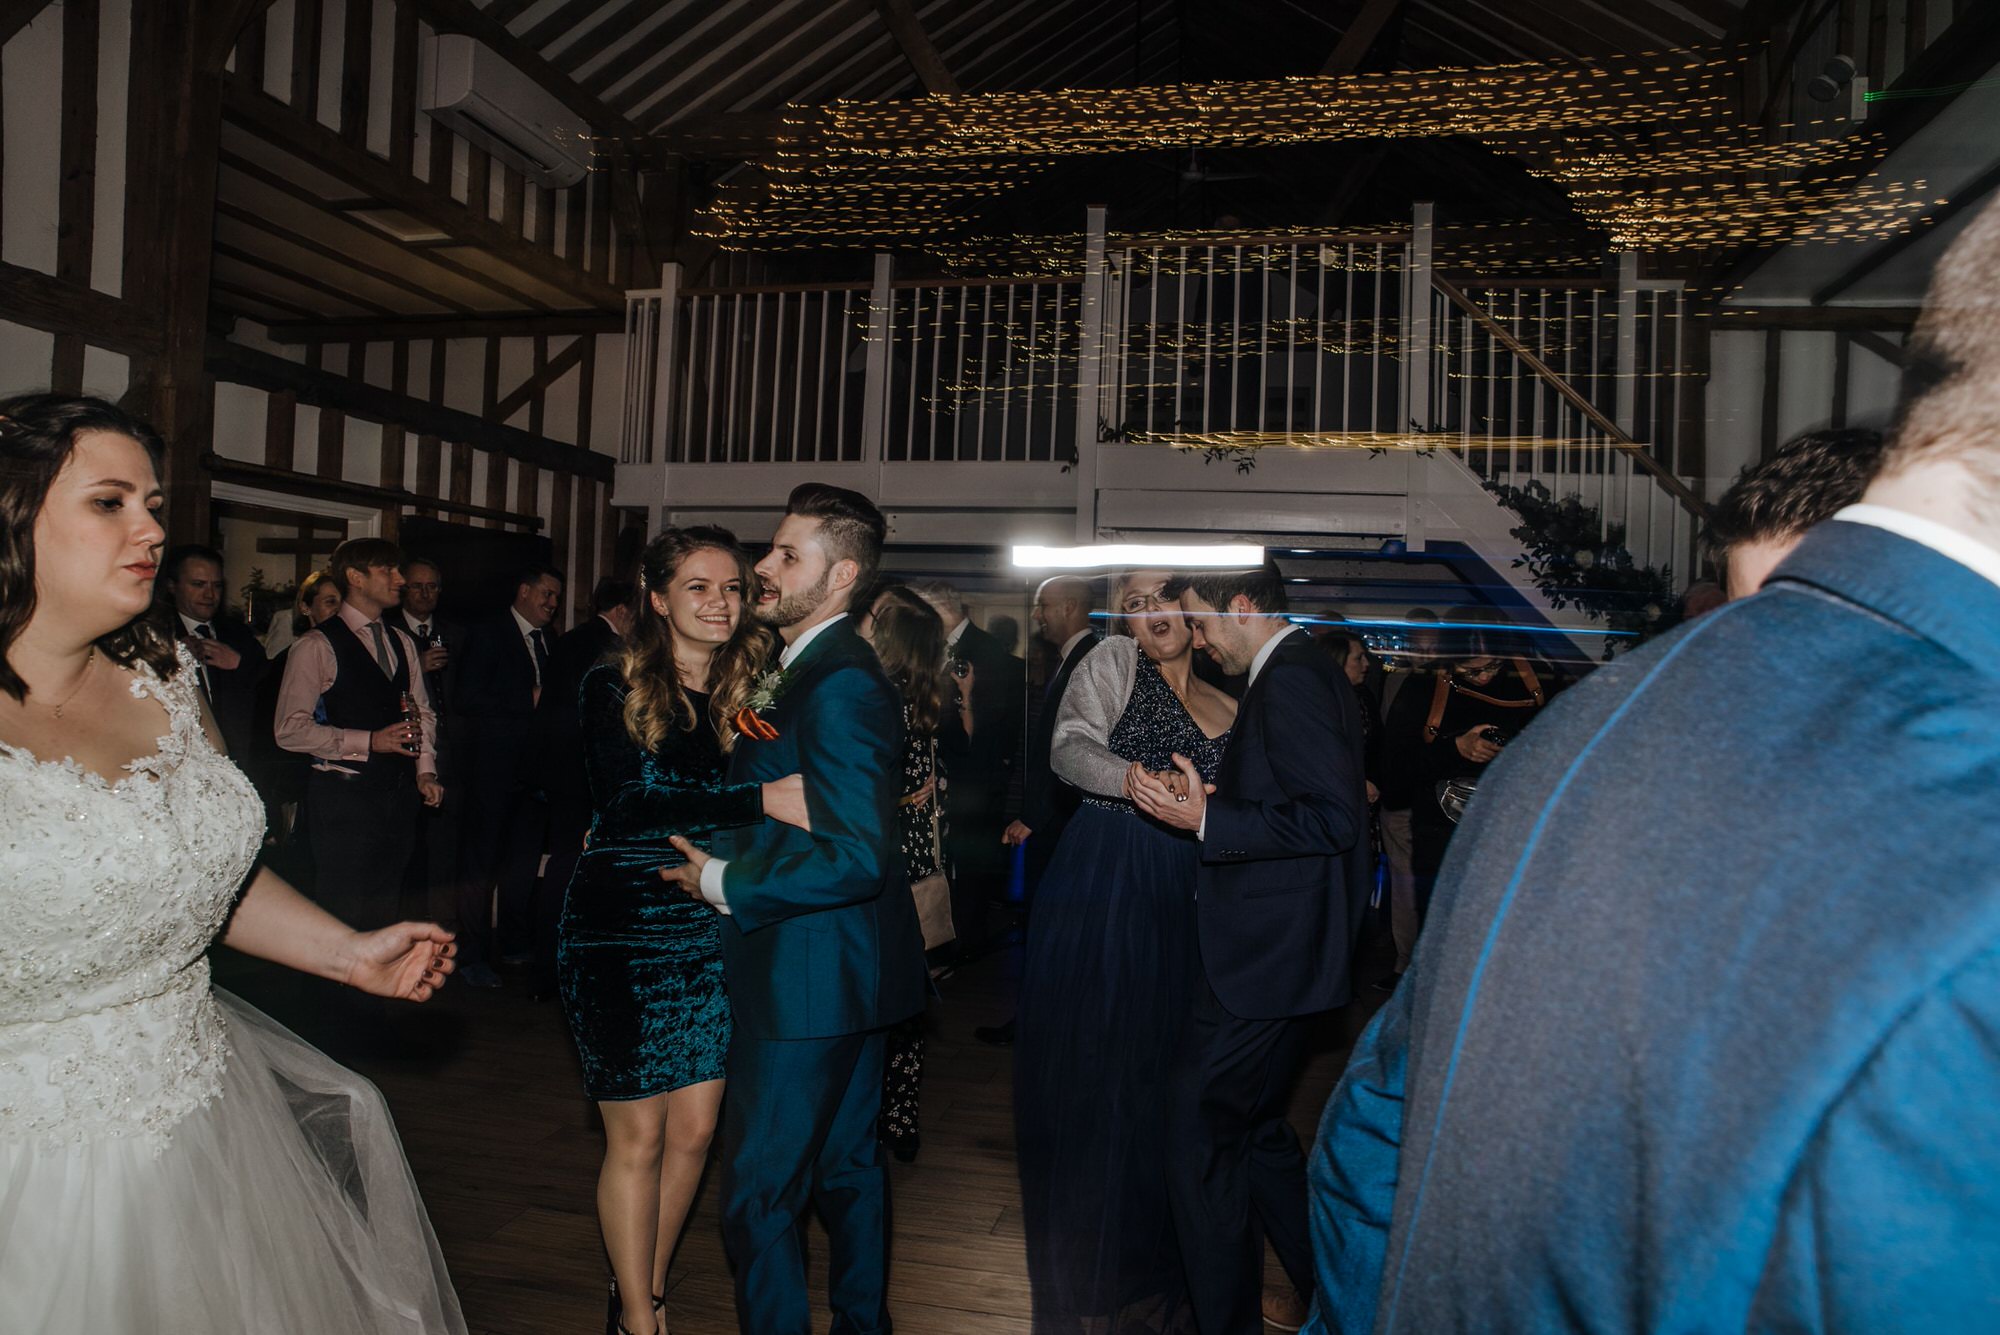 first dance bride and groom at the reception Roshni photography The Milling Barn, Bluntswood Hall, Throcking wedding photographer